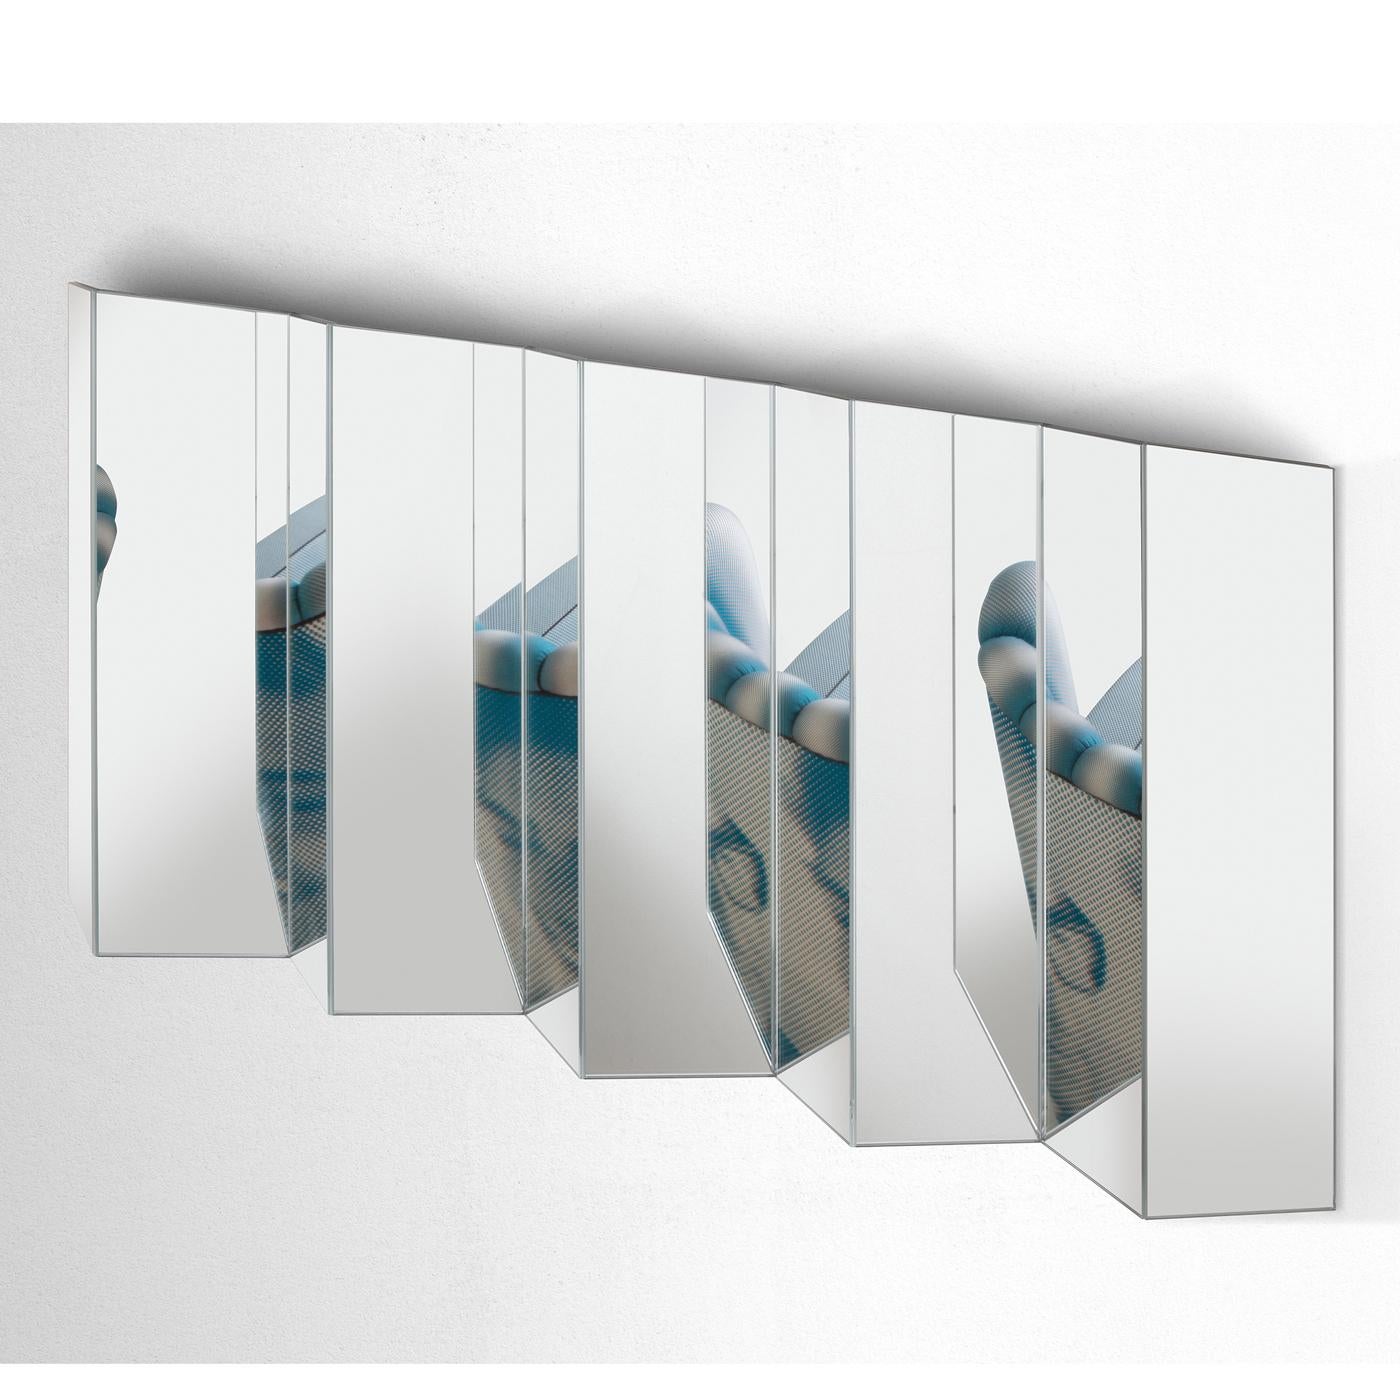 Inspired by the rigor and repetitiveness of mathematics, this wall mirror by Marco Brunori is made of a series of mirrored glass surfaces six mm which with a beveled edge that can be combined together both horizontally and vertically. The base for